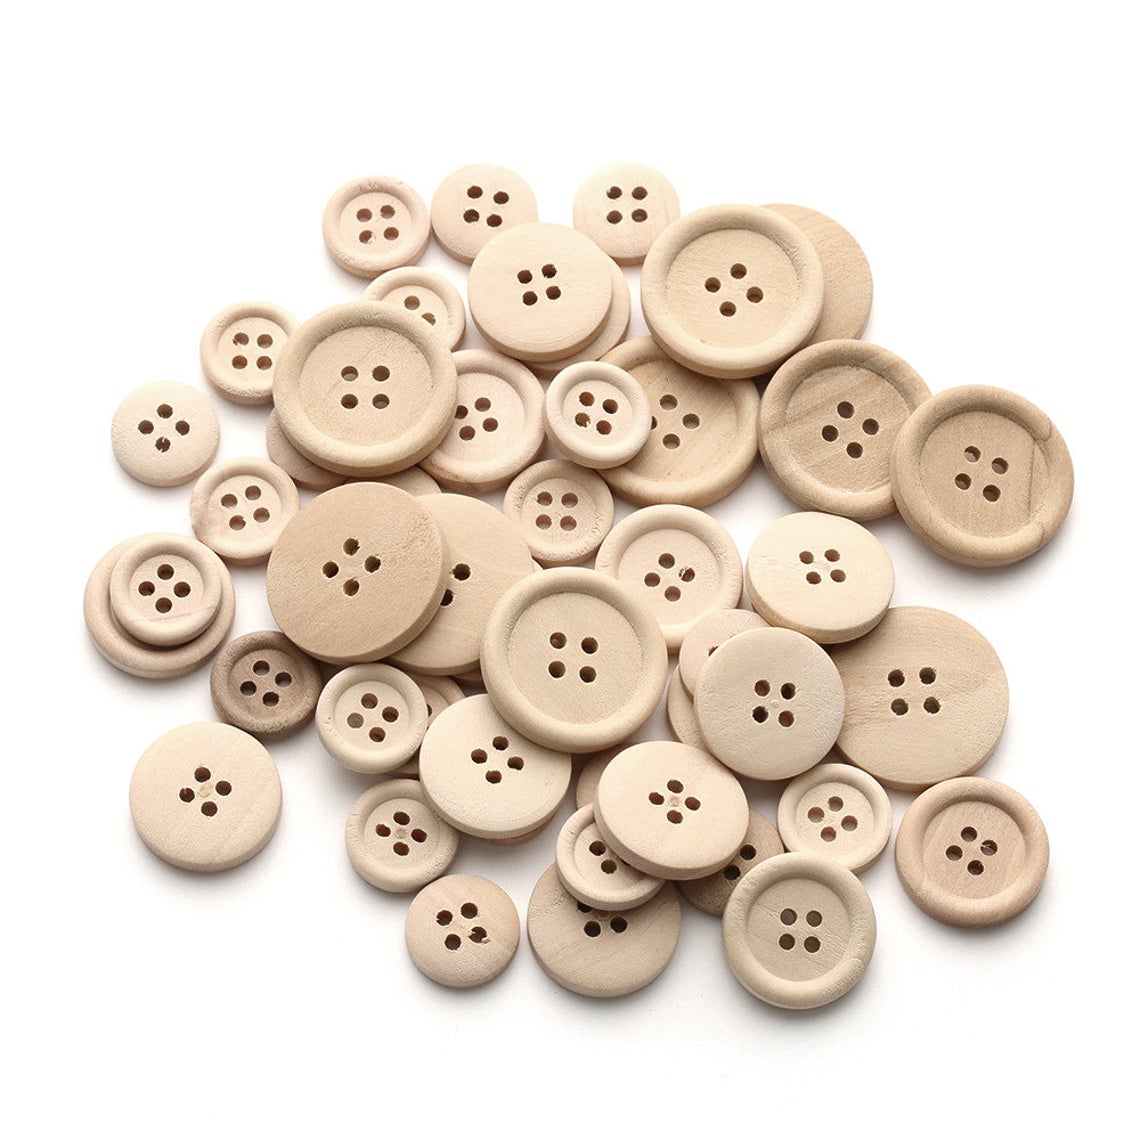 10PCs & 30PCs Natural Color Round Piping Camellia Wood Grain Wooden Buttons  10mm-30mm Sewing Accessories Clothes 4 Holes Button